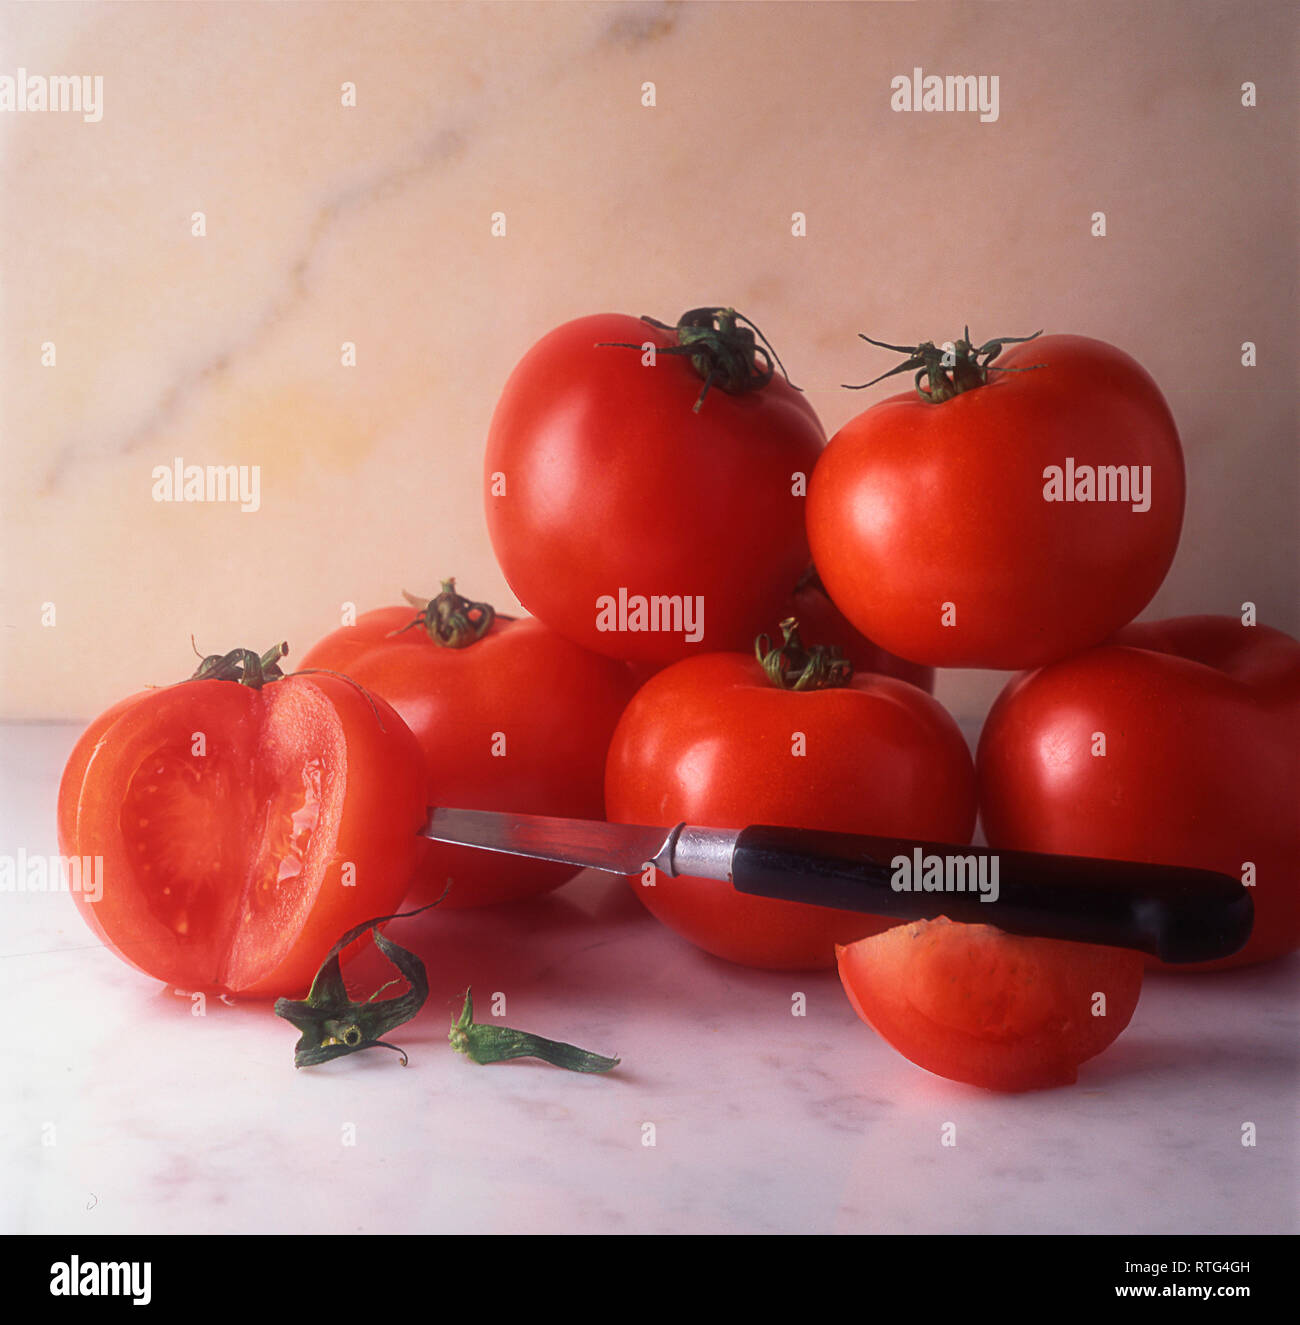 Tomatoes and a knife Stock Photo